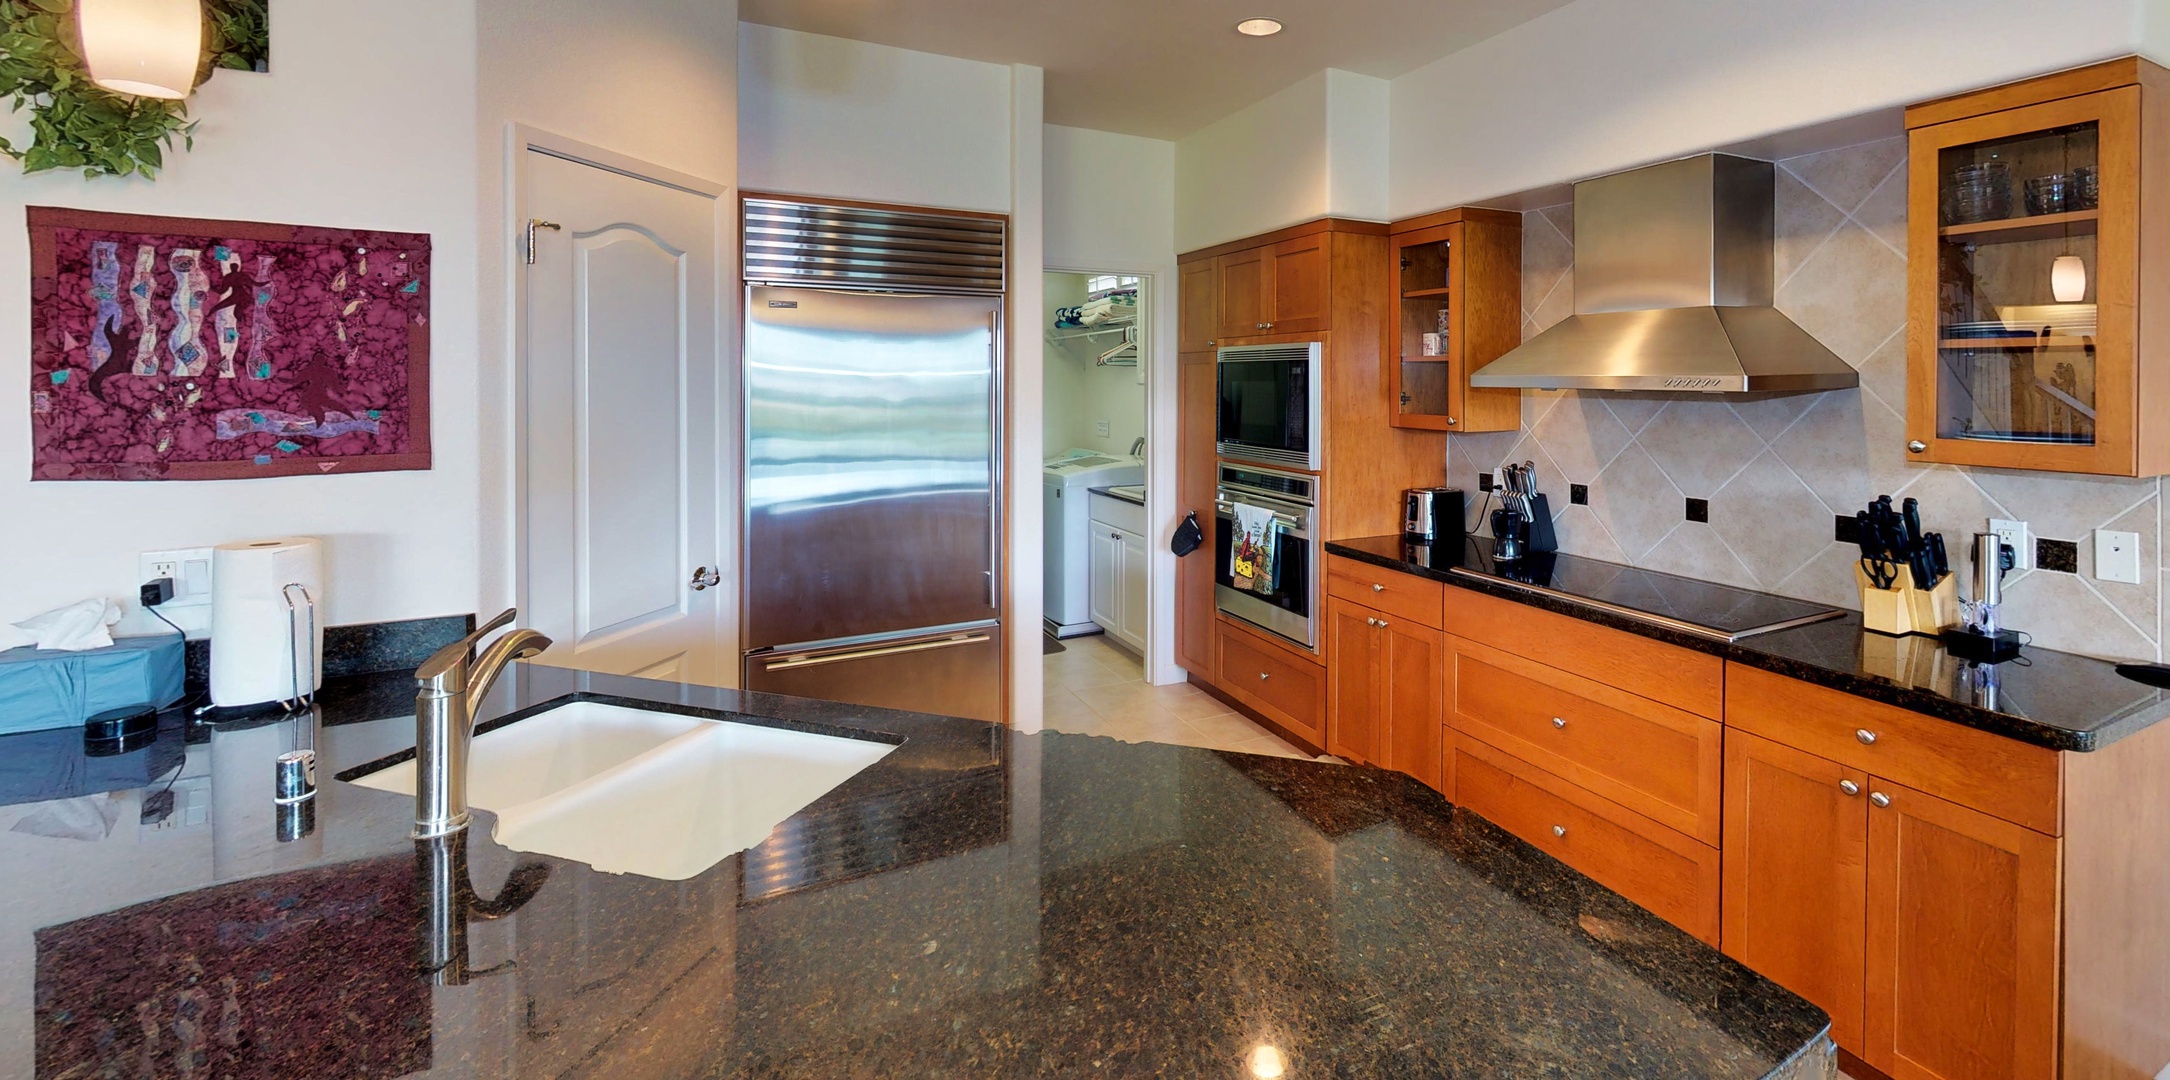 Kapolei Vacation Rentals, Ko Olina Kai Estate #17 - Kitchen equipped with ample wooden cabinetry to store all your culinary essentials.